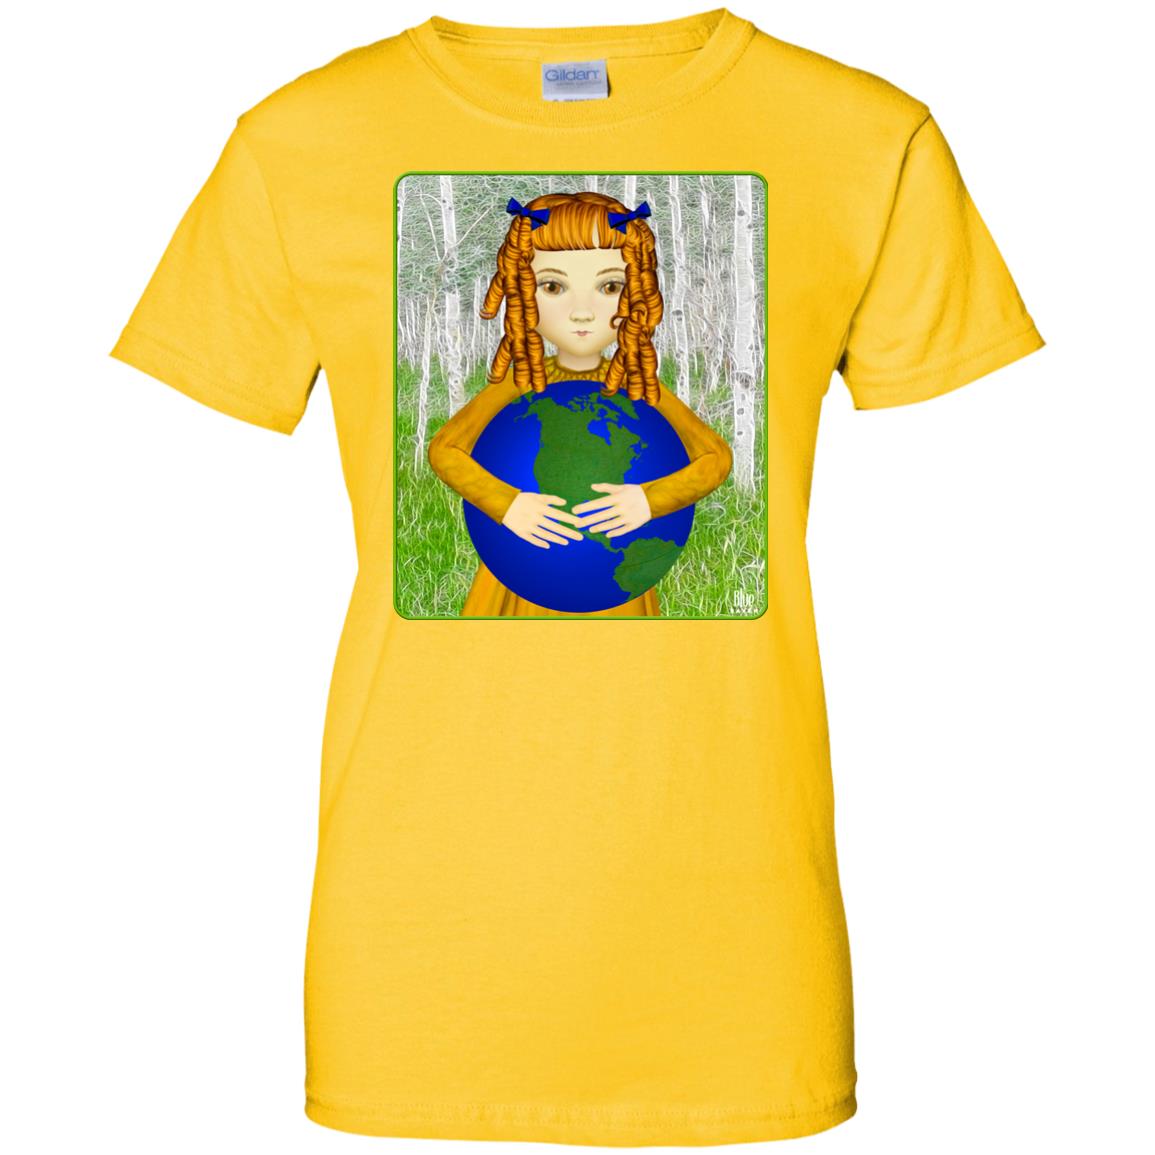 Save My World - Women's Relaxed Fit T-Shirt